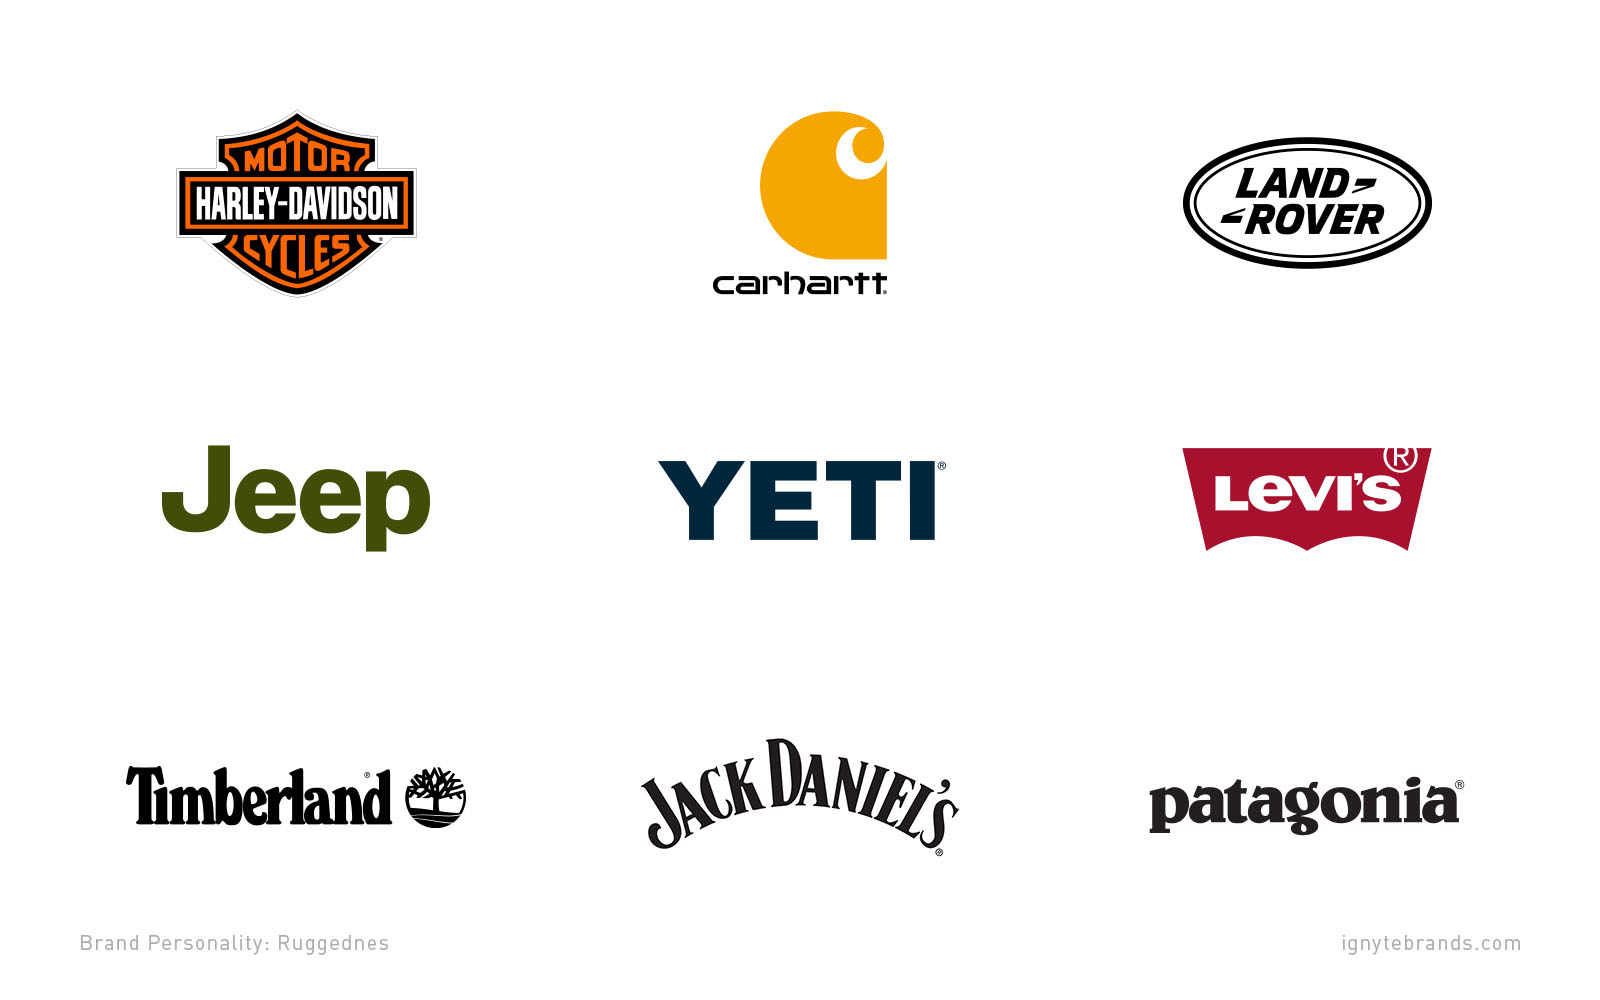 9 examples of brands with rugged brand personalities, including Harley Davidson, Carharrt, Land Rover, Jeep, Yeti, Levi's, Timberland, and Patagonia